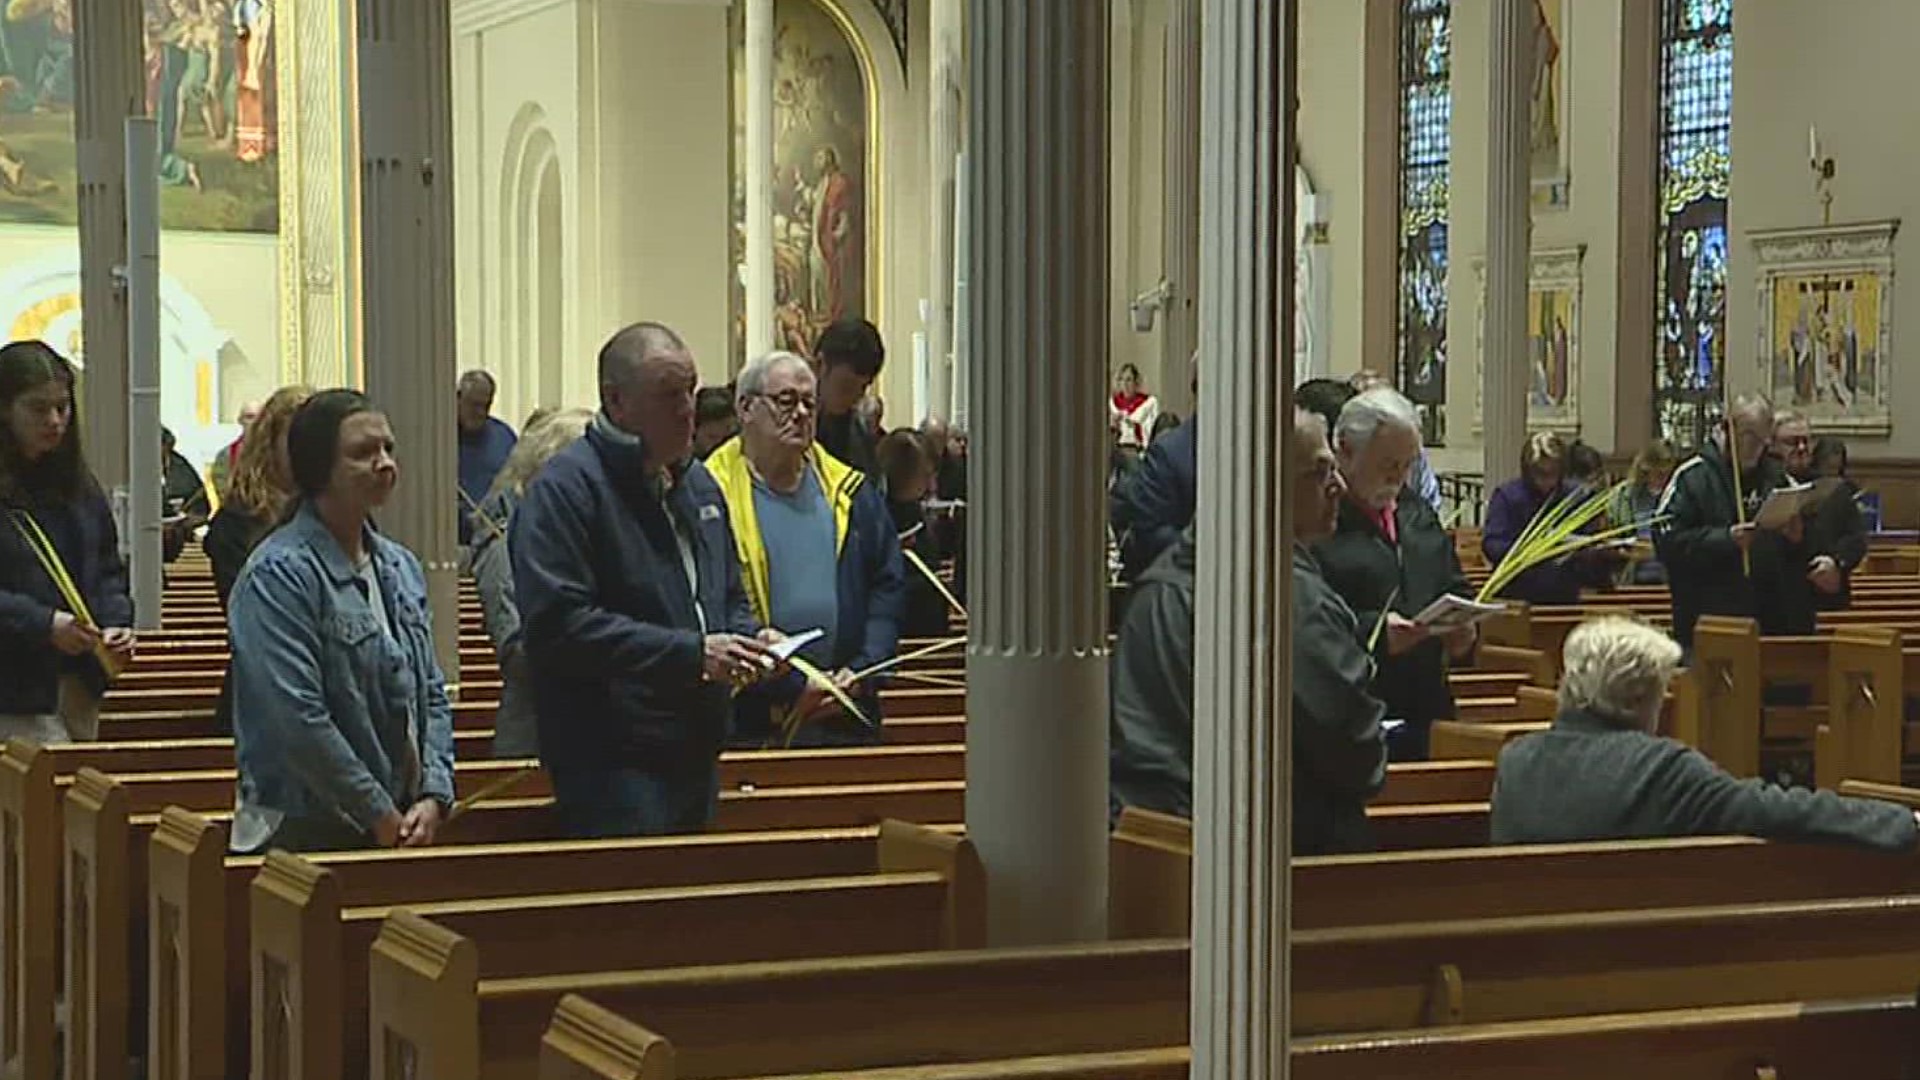 The faithful across our area and around the world celebrated Palm Sunday. Newswatch 16 caught up with churchgoers in Scranton.